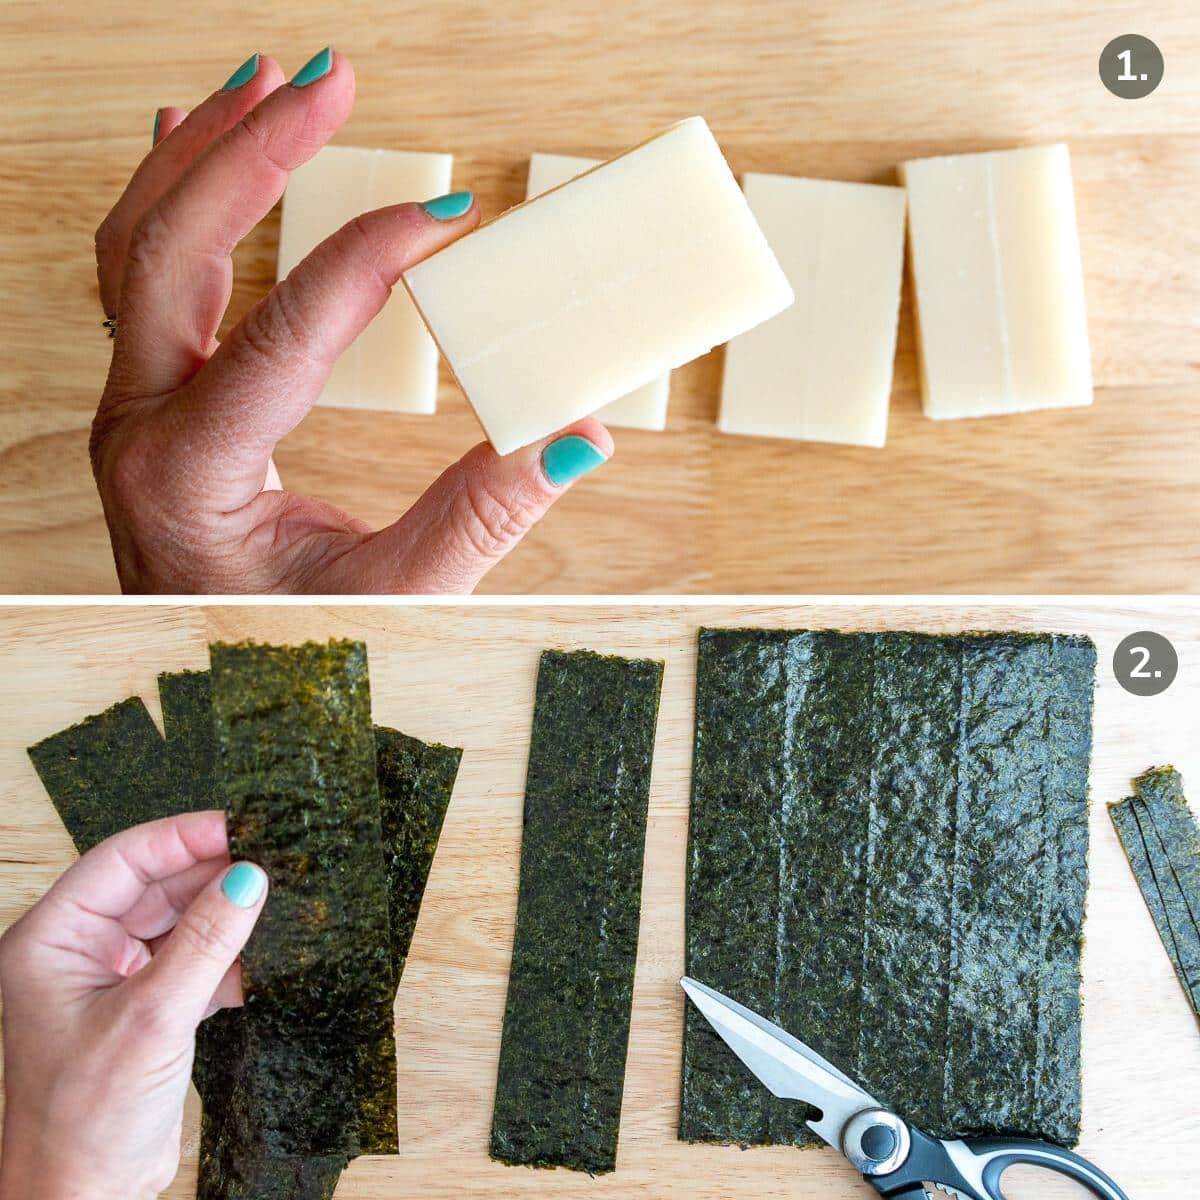 Opening up kirimochi packages and cutting up nori.